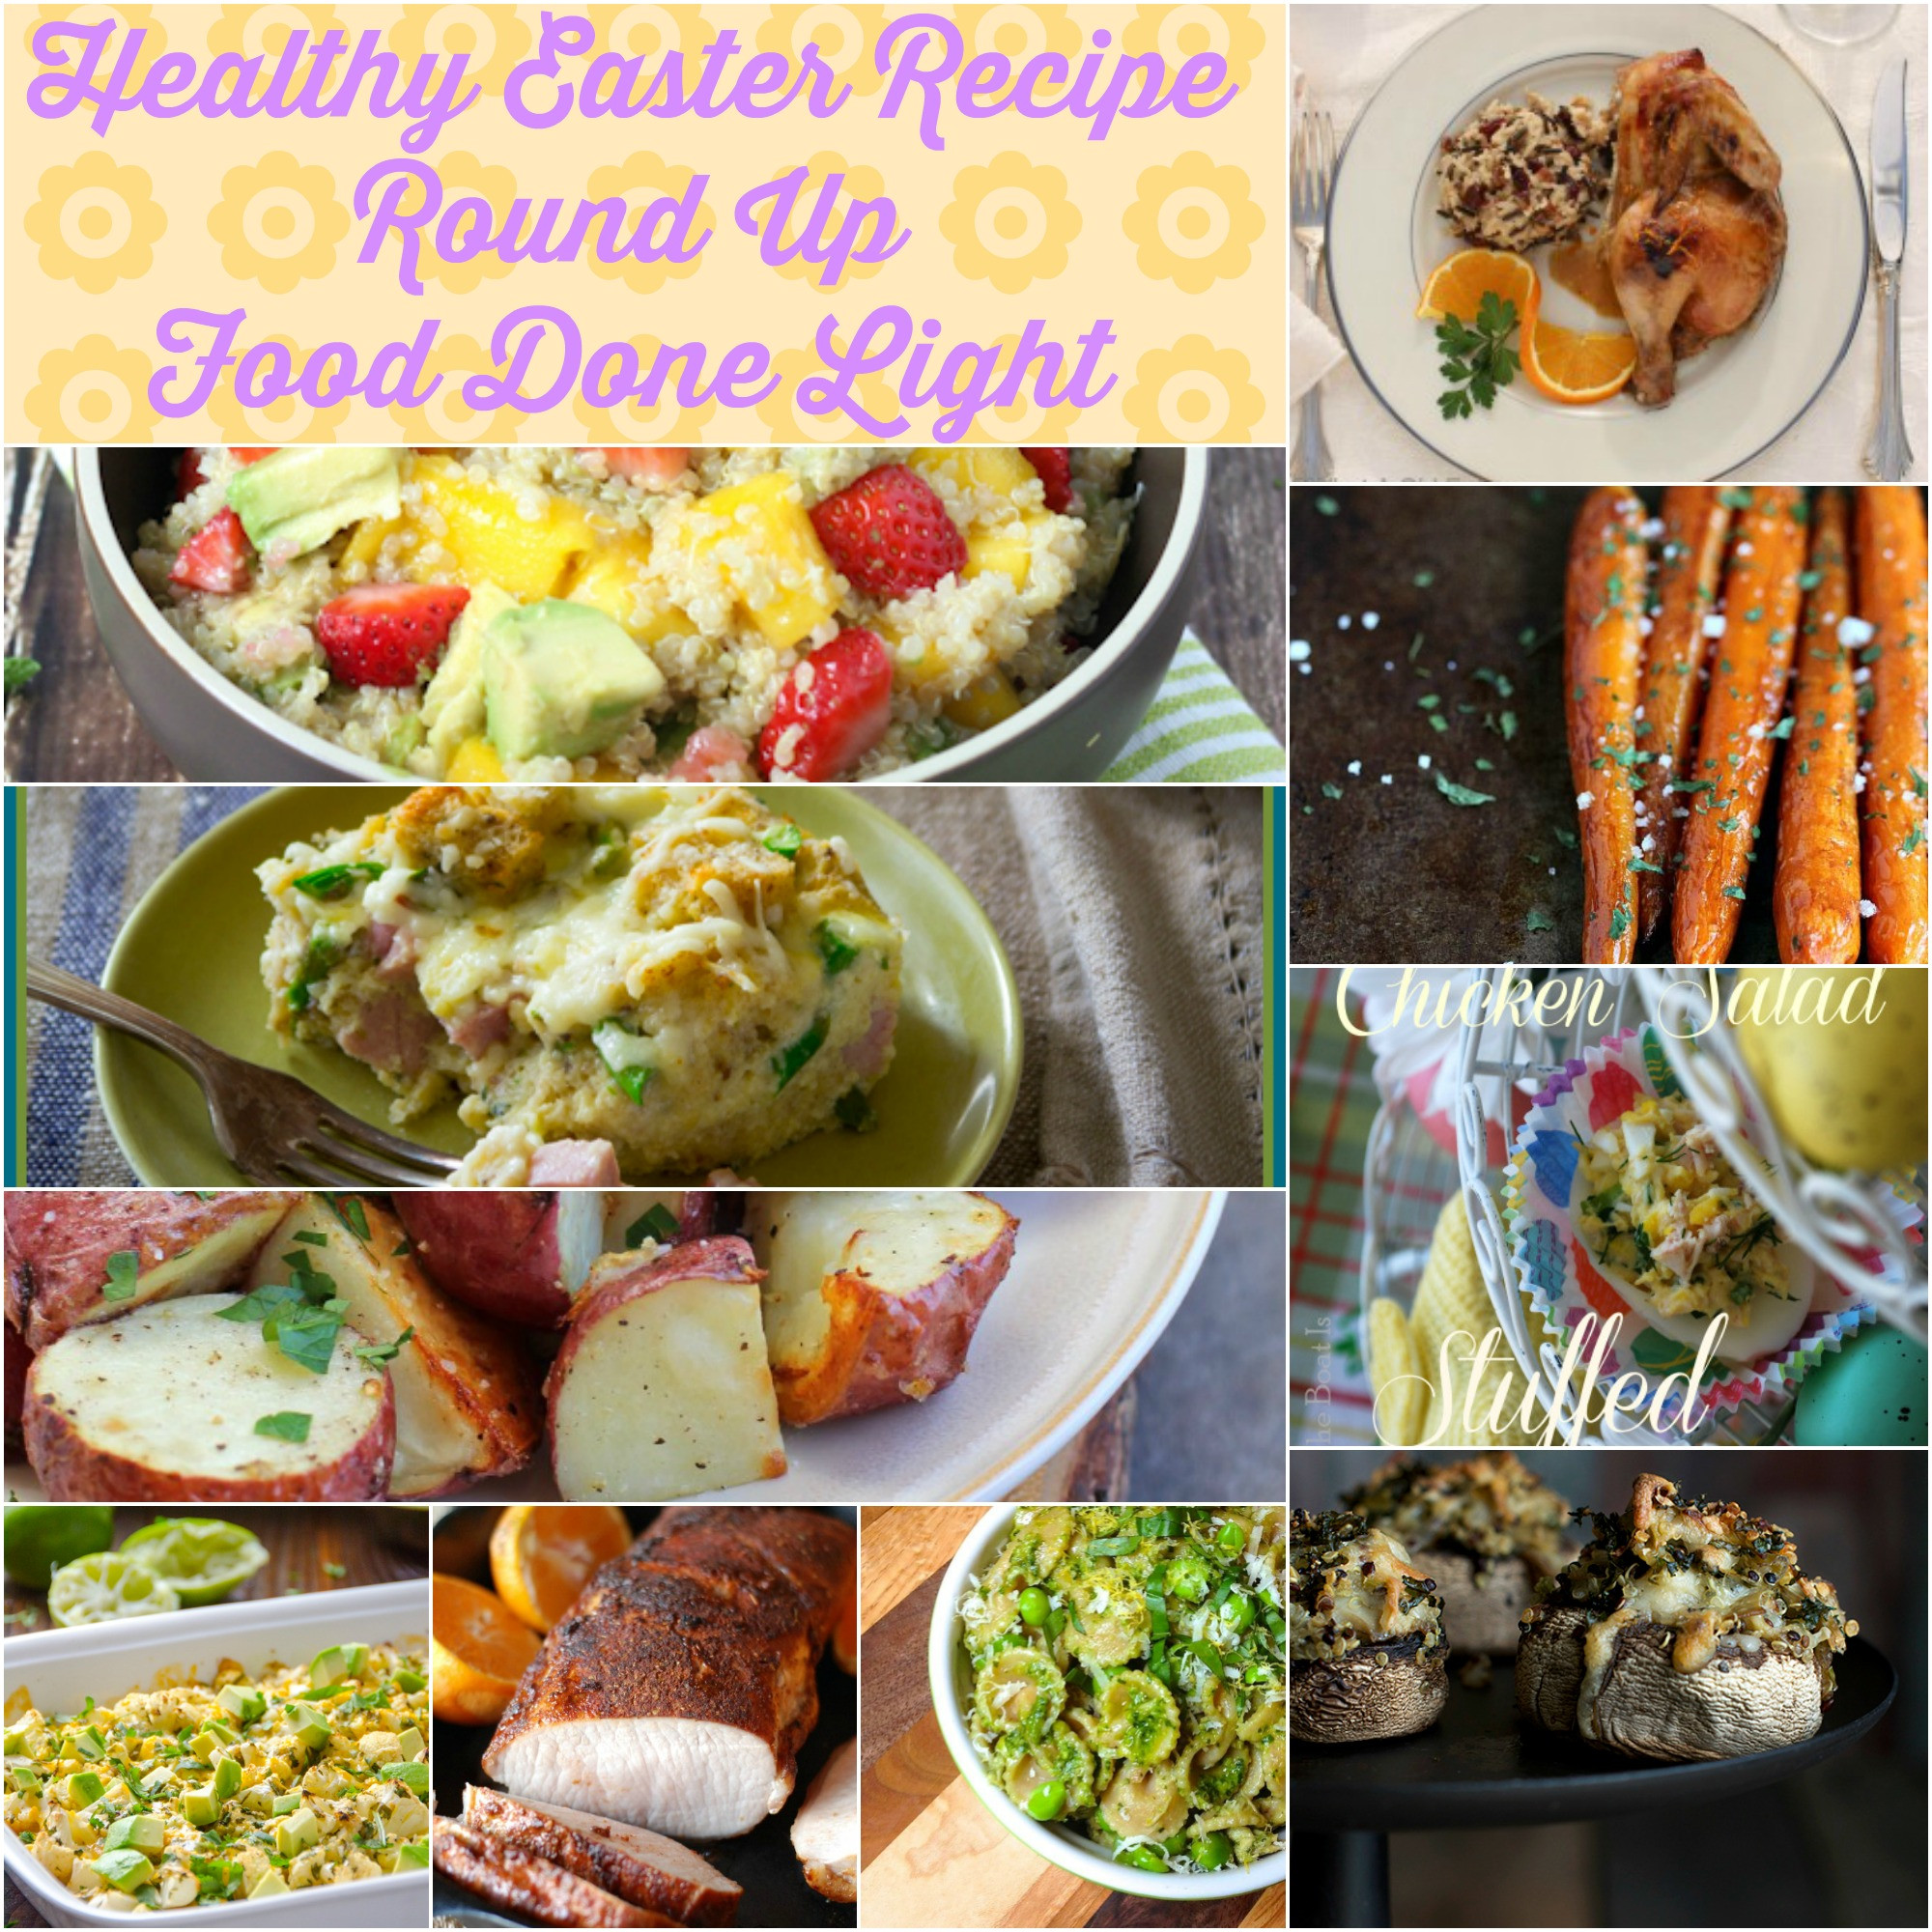 Recipes For Easter Dinner
 Healthy Easter Recipe Round Up Food Done Light